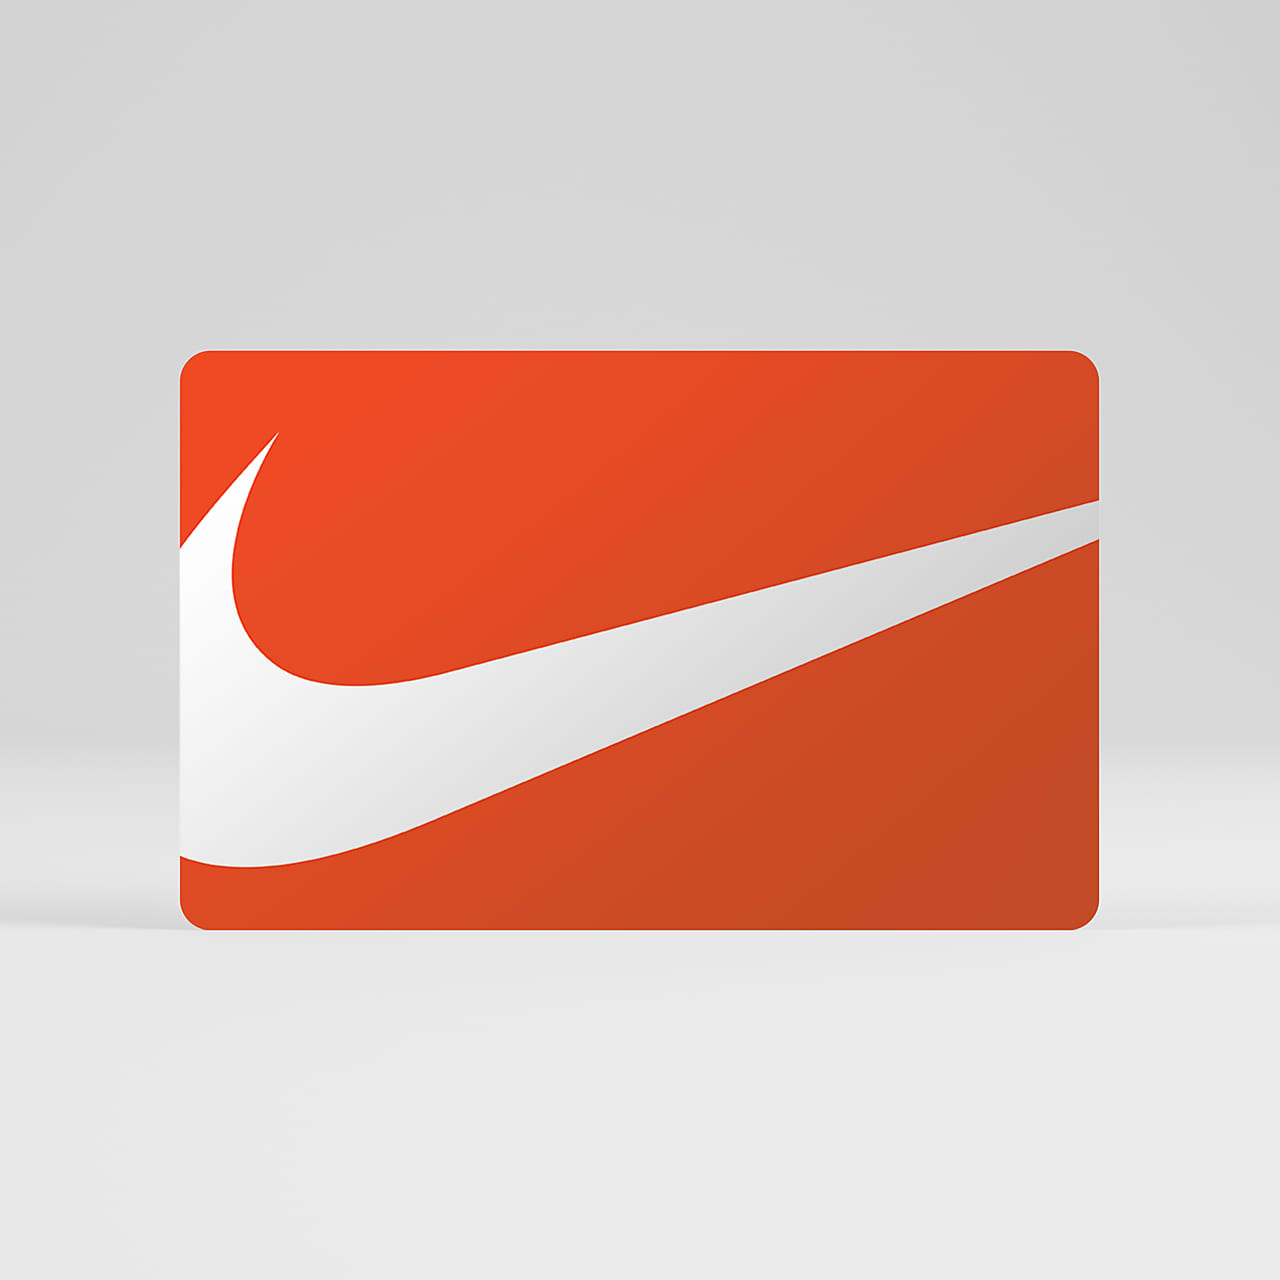 Card Emailed in Approximately 2 Hours or Nike.com